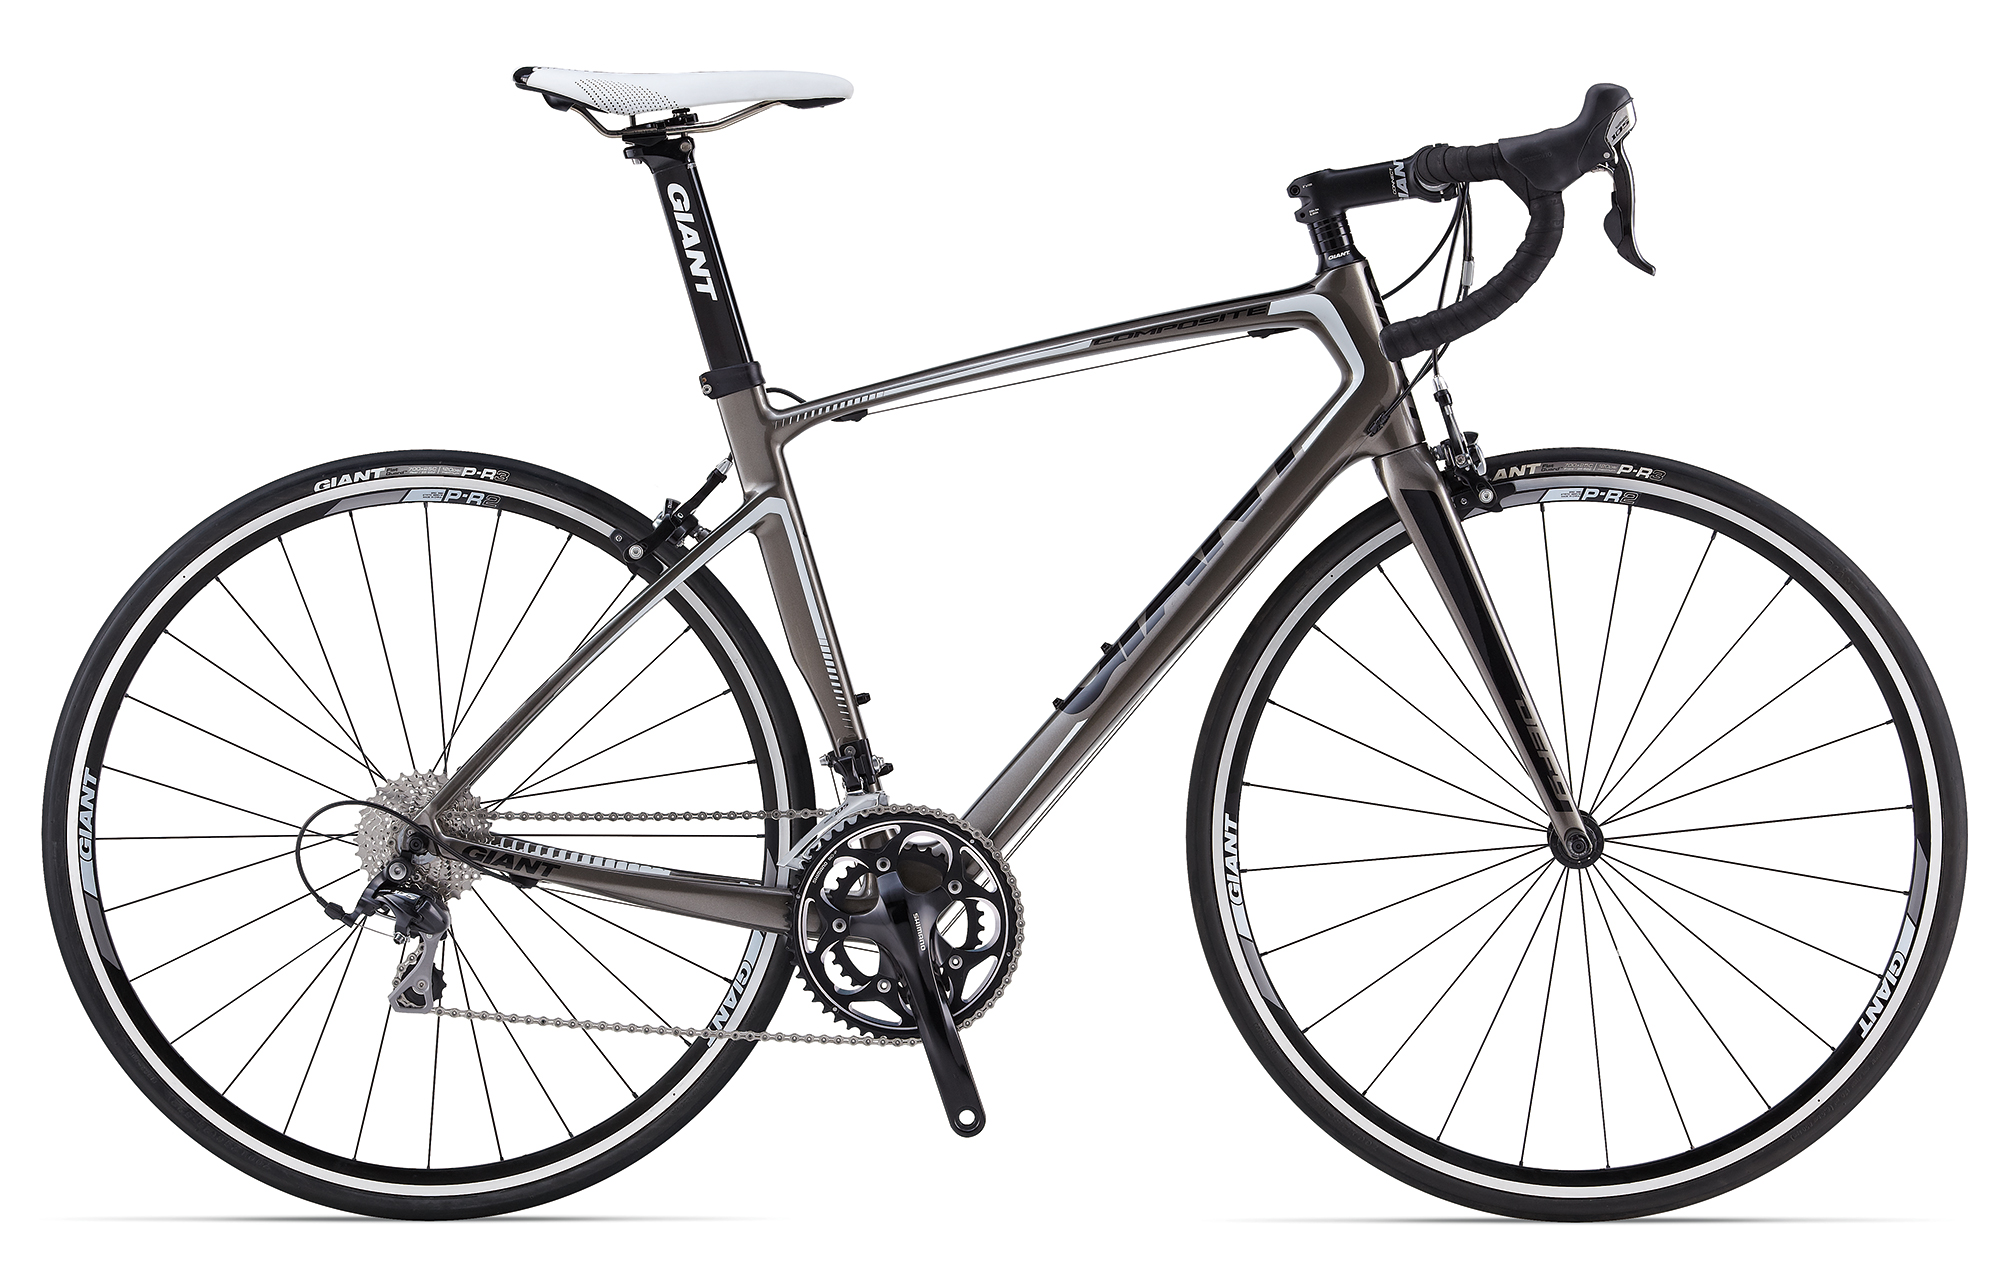 2014 Giant Defy Composite 2 - Bicycle 